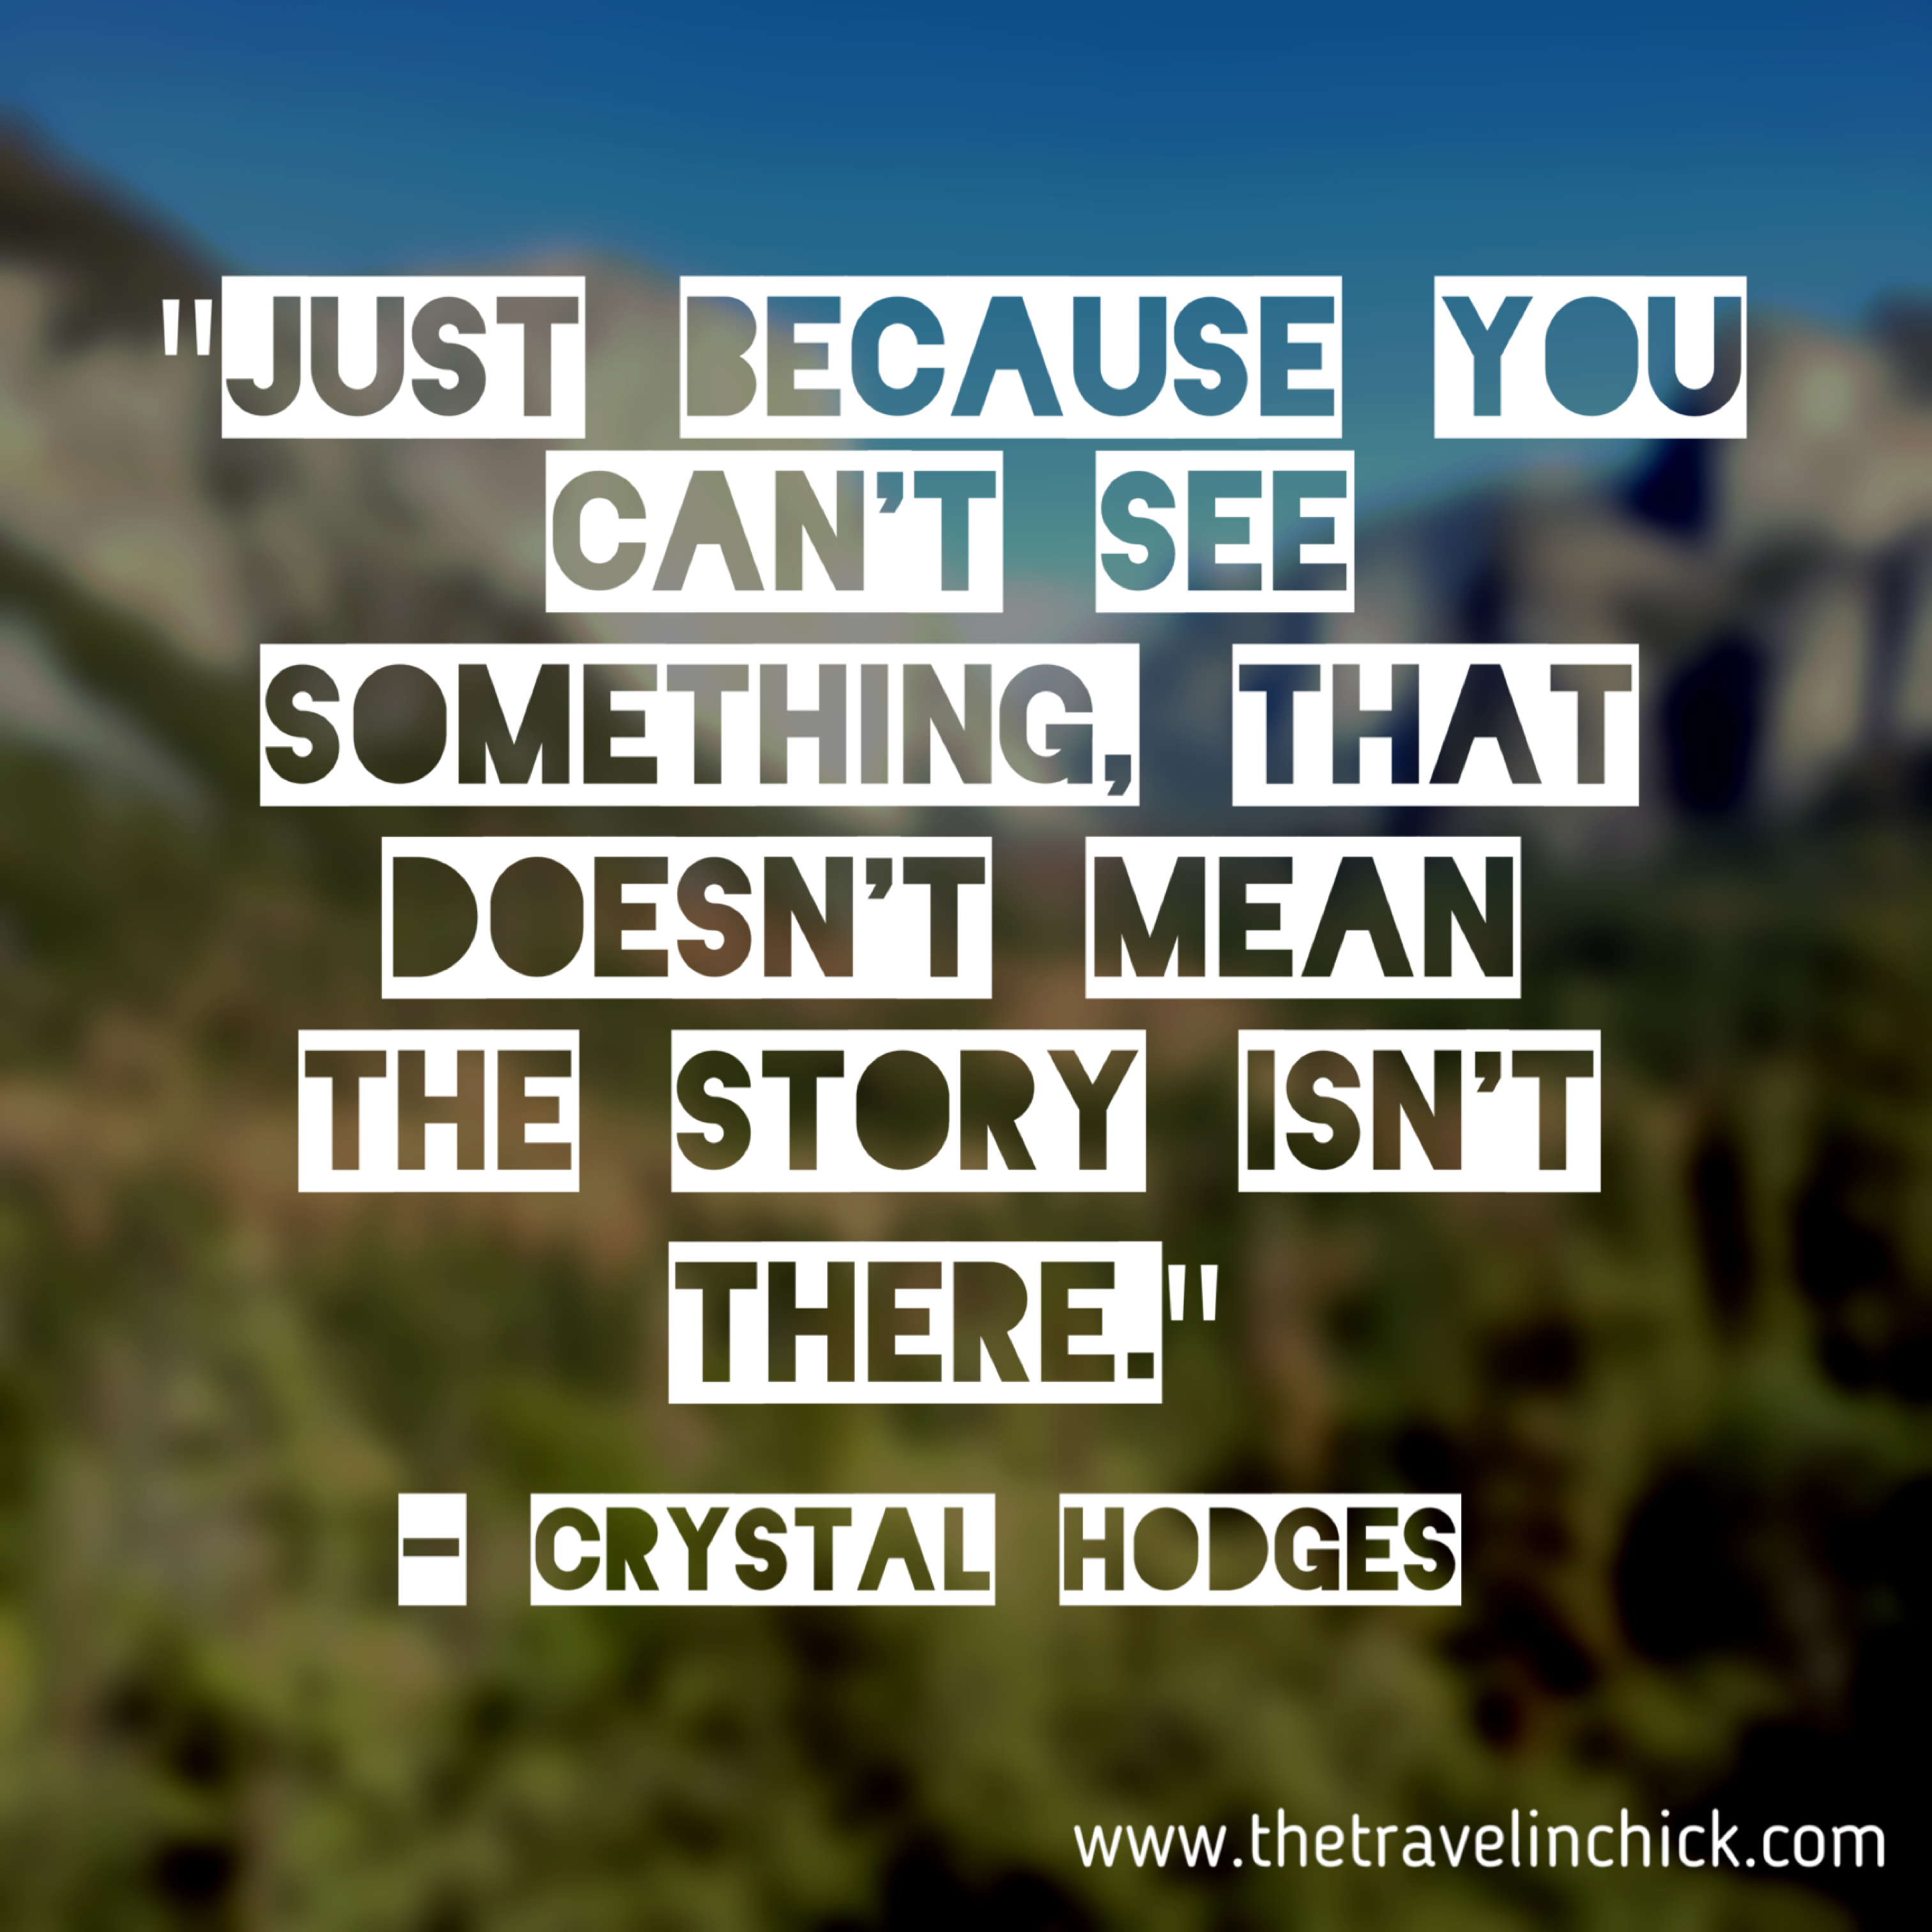 Meme that says [just because you can't see something, that doesn't mean the story isn't there. crystal hodges]